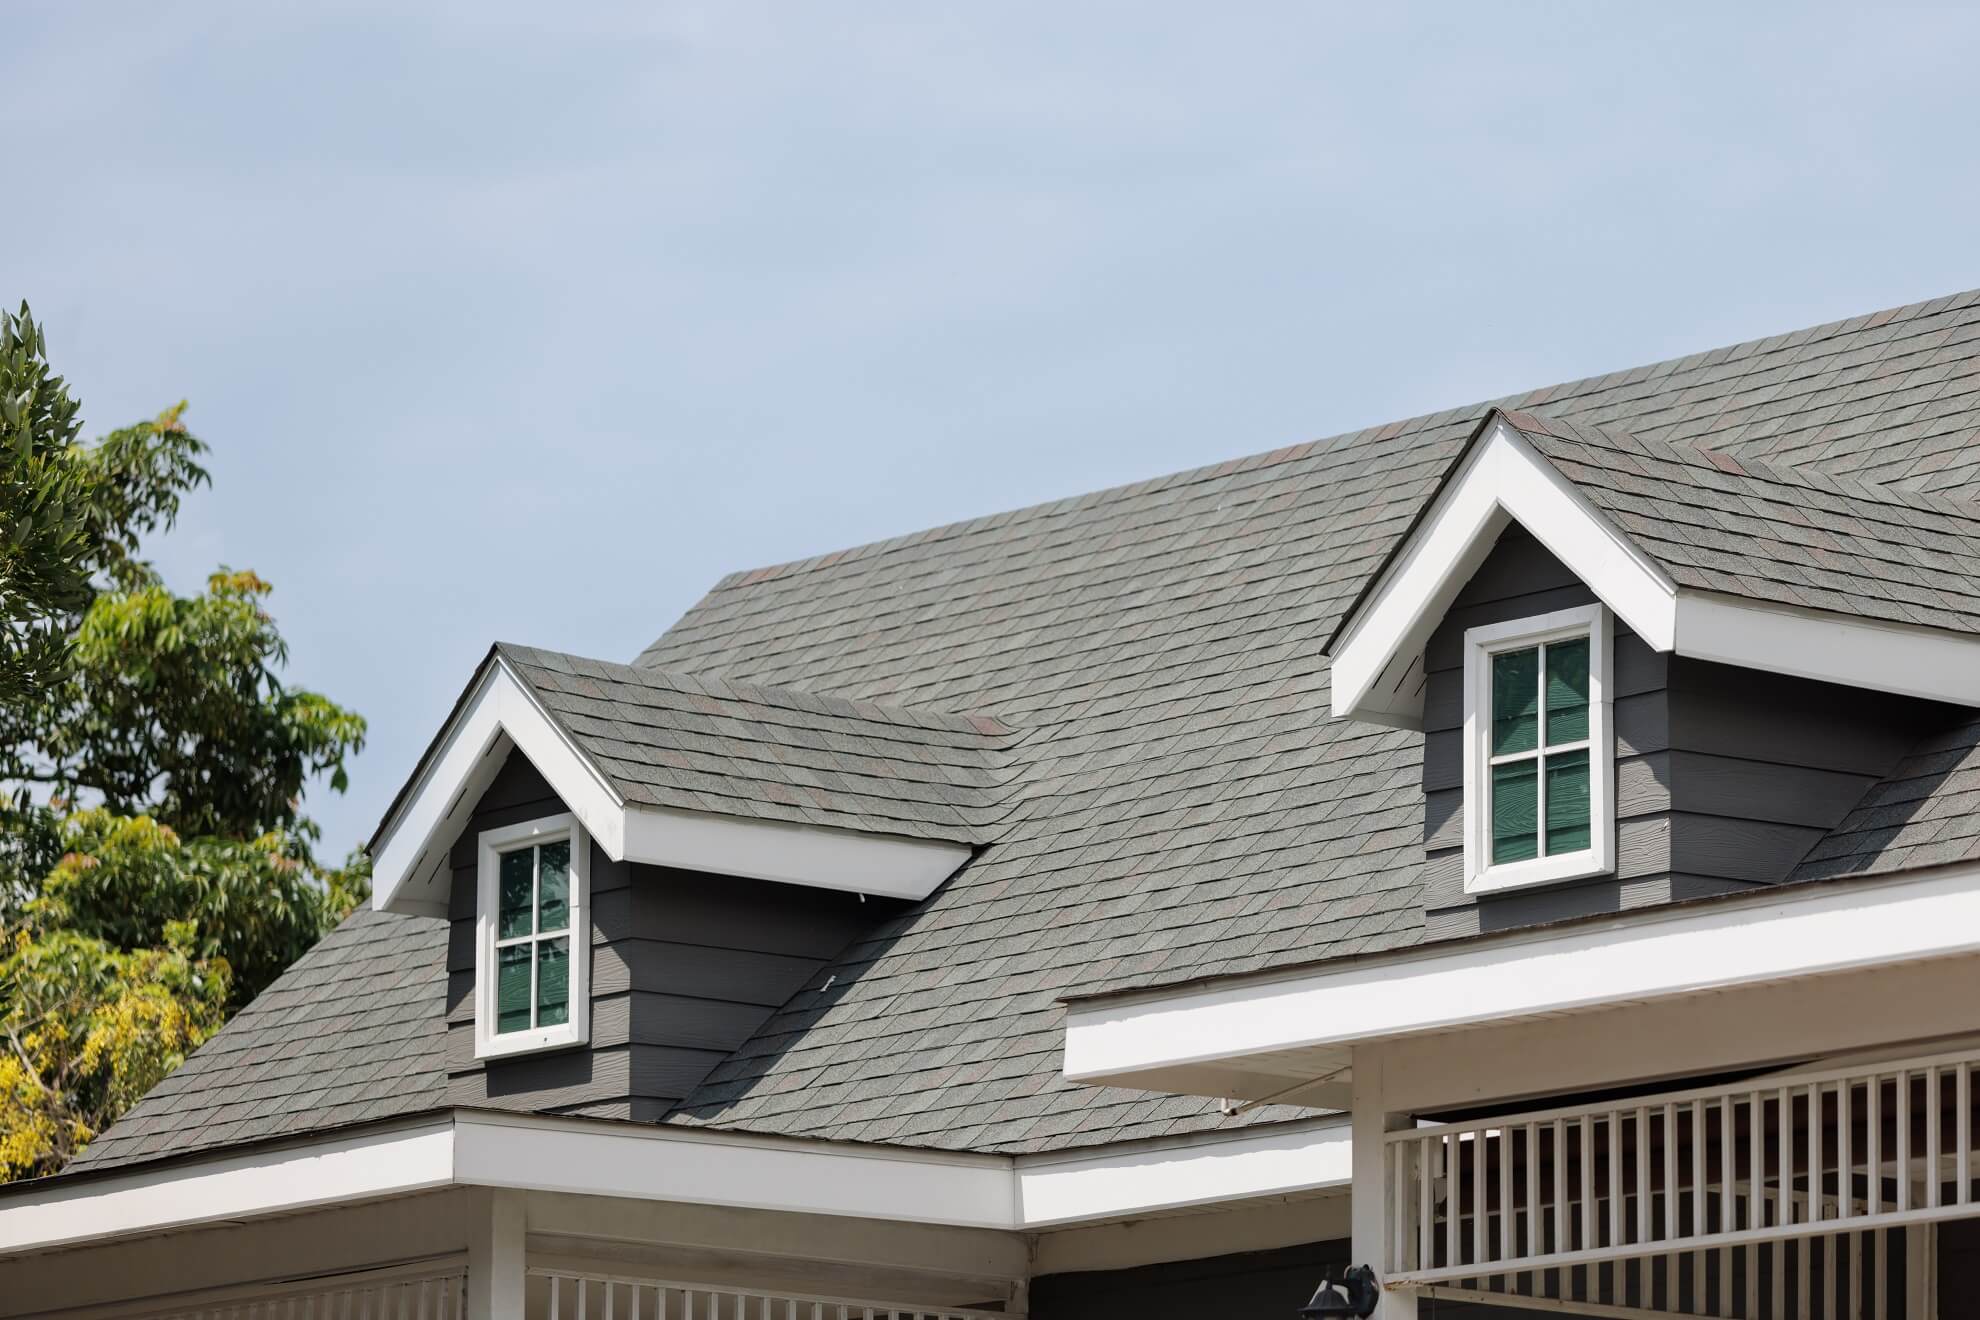  The Latest Trends in Roofing Styles and Designs